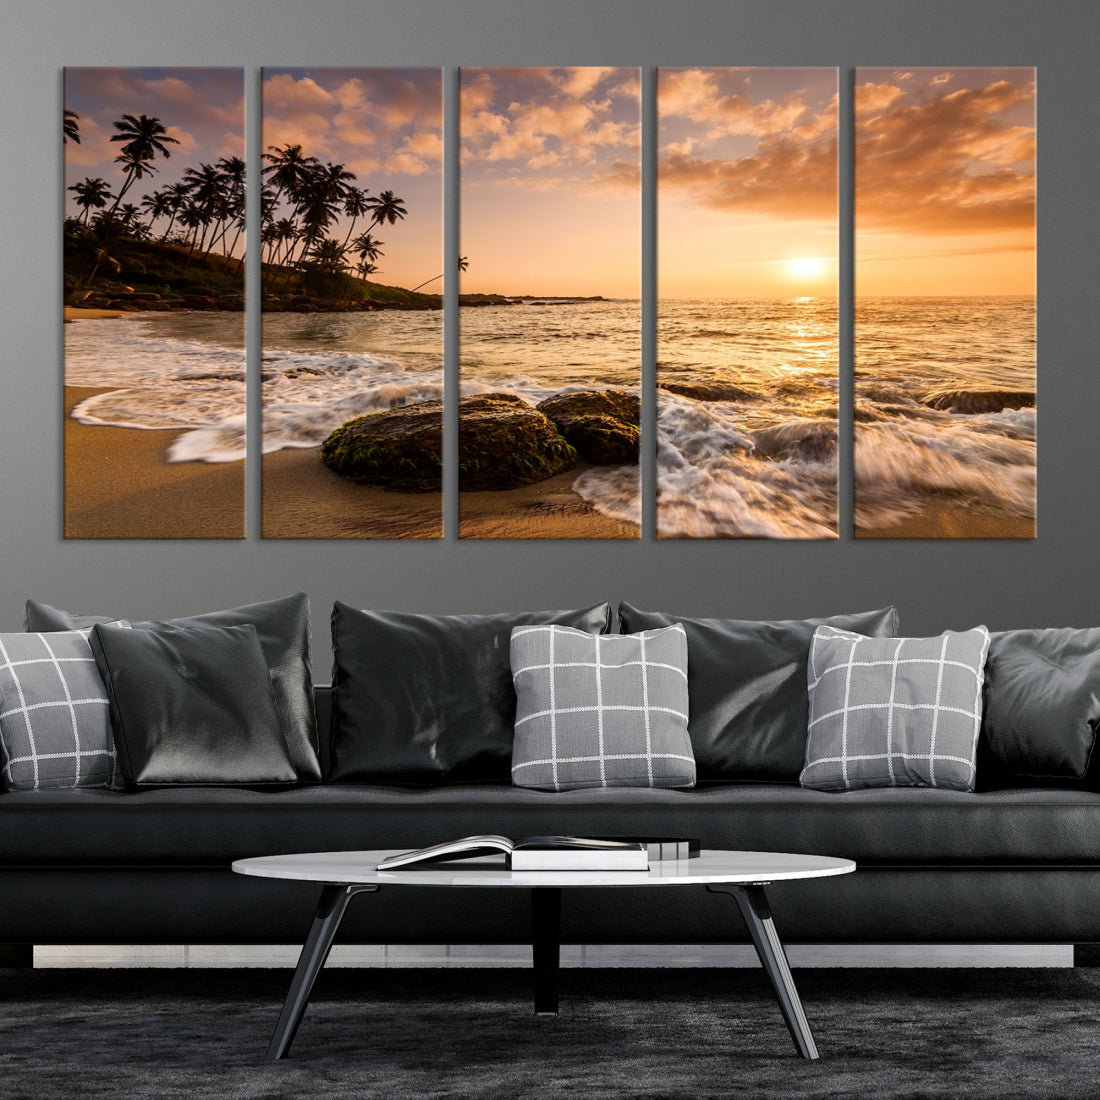 Tropical Island and Sunset Landscape Giclee Print Large Canvas Wall Art